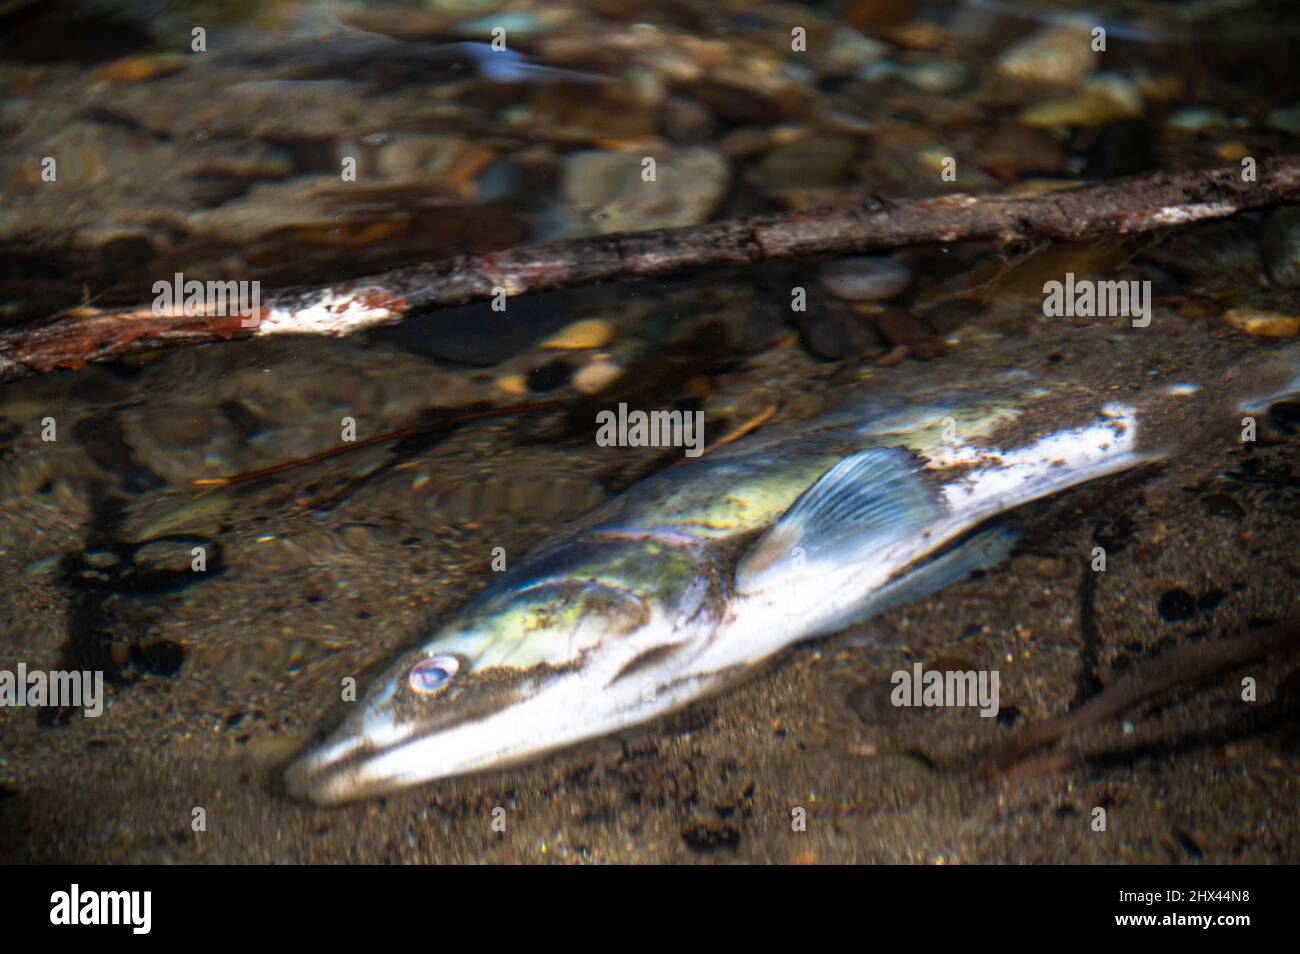 dead  and decaying Pacific salmon after spawning in the Green River of Washington state Stock Photo